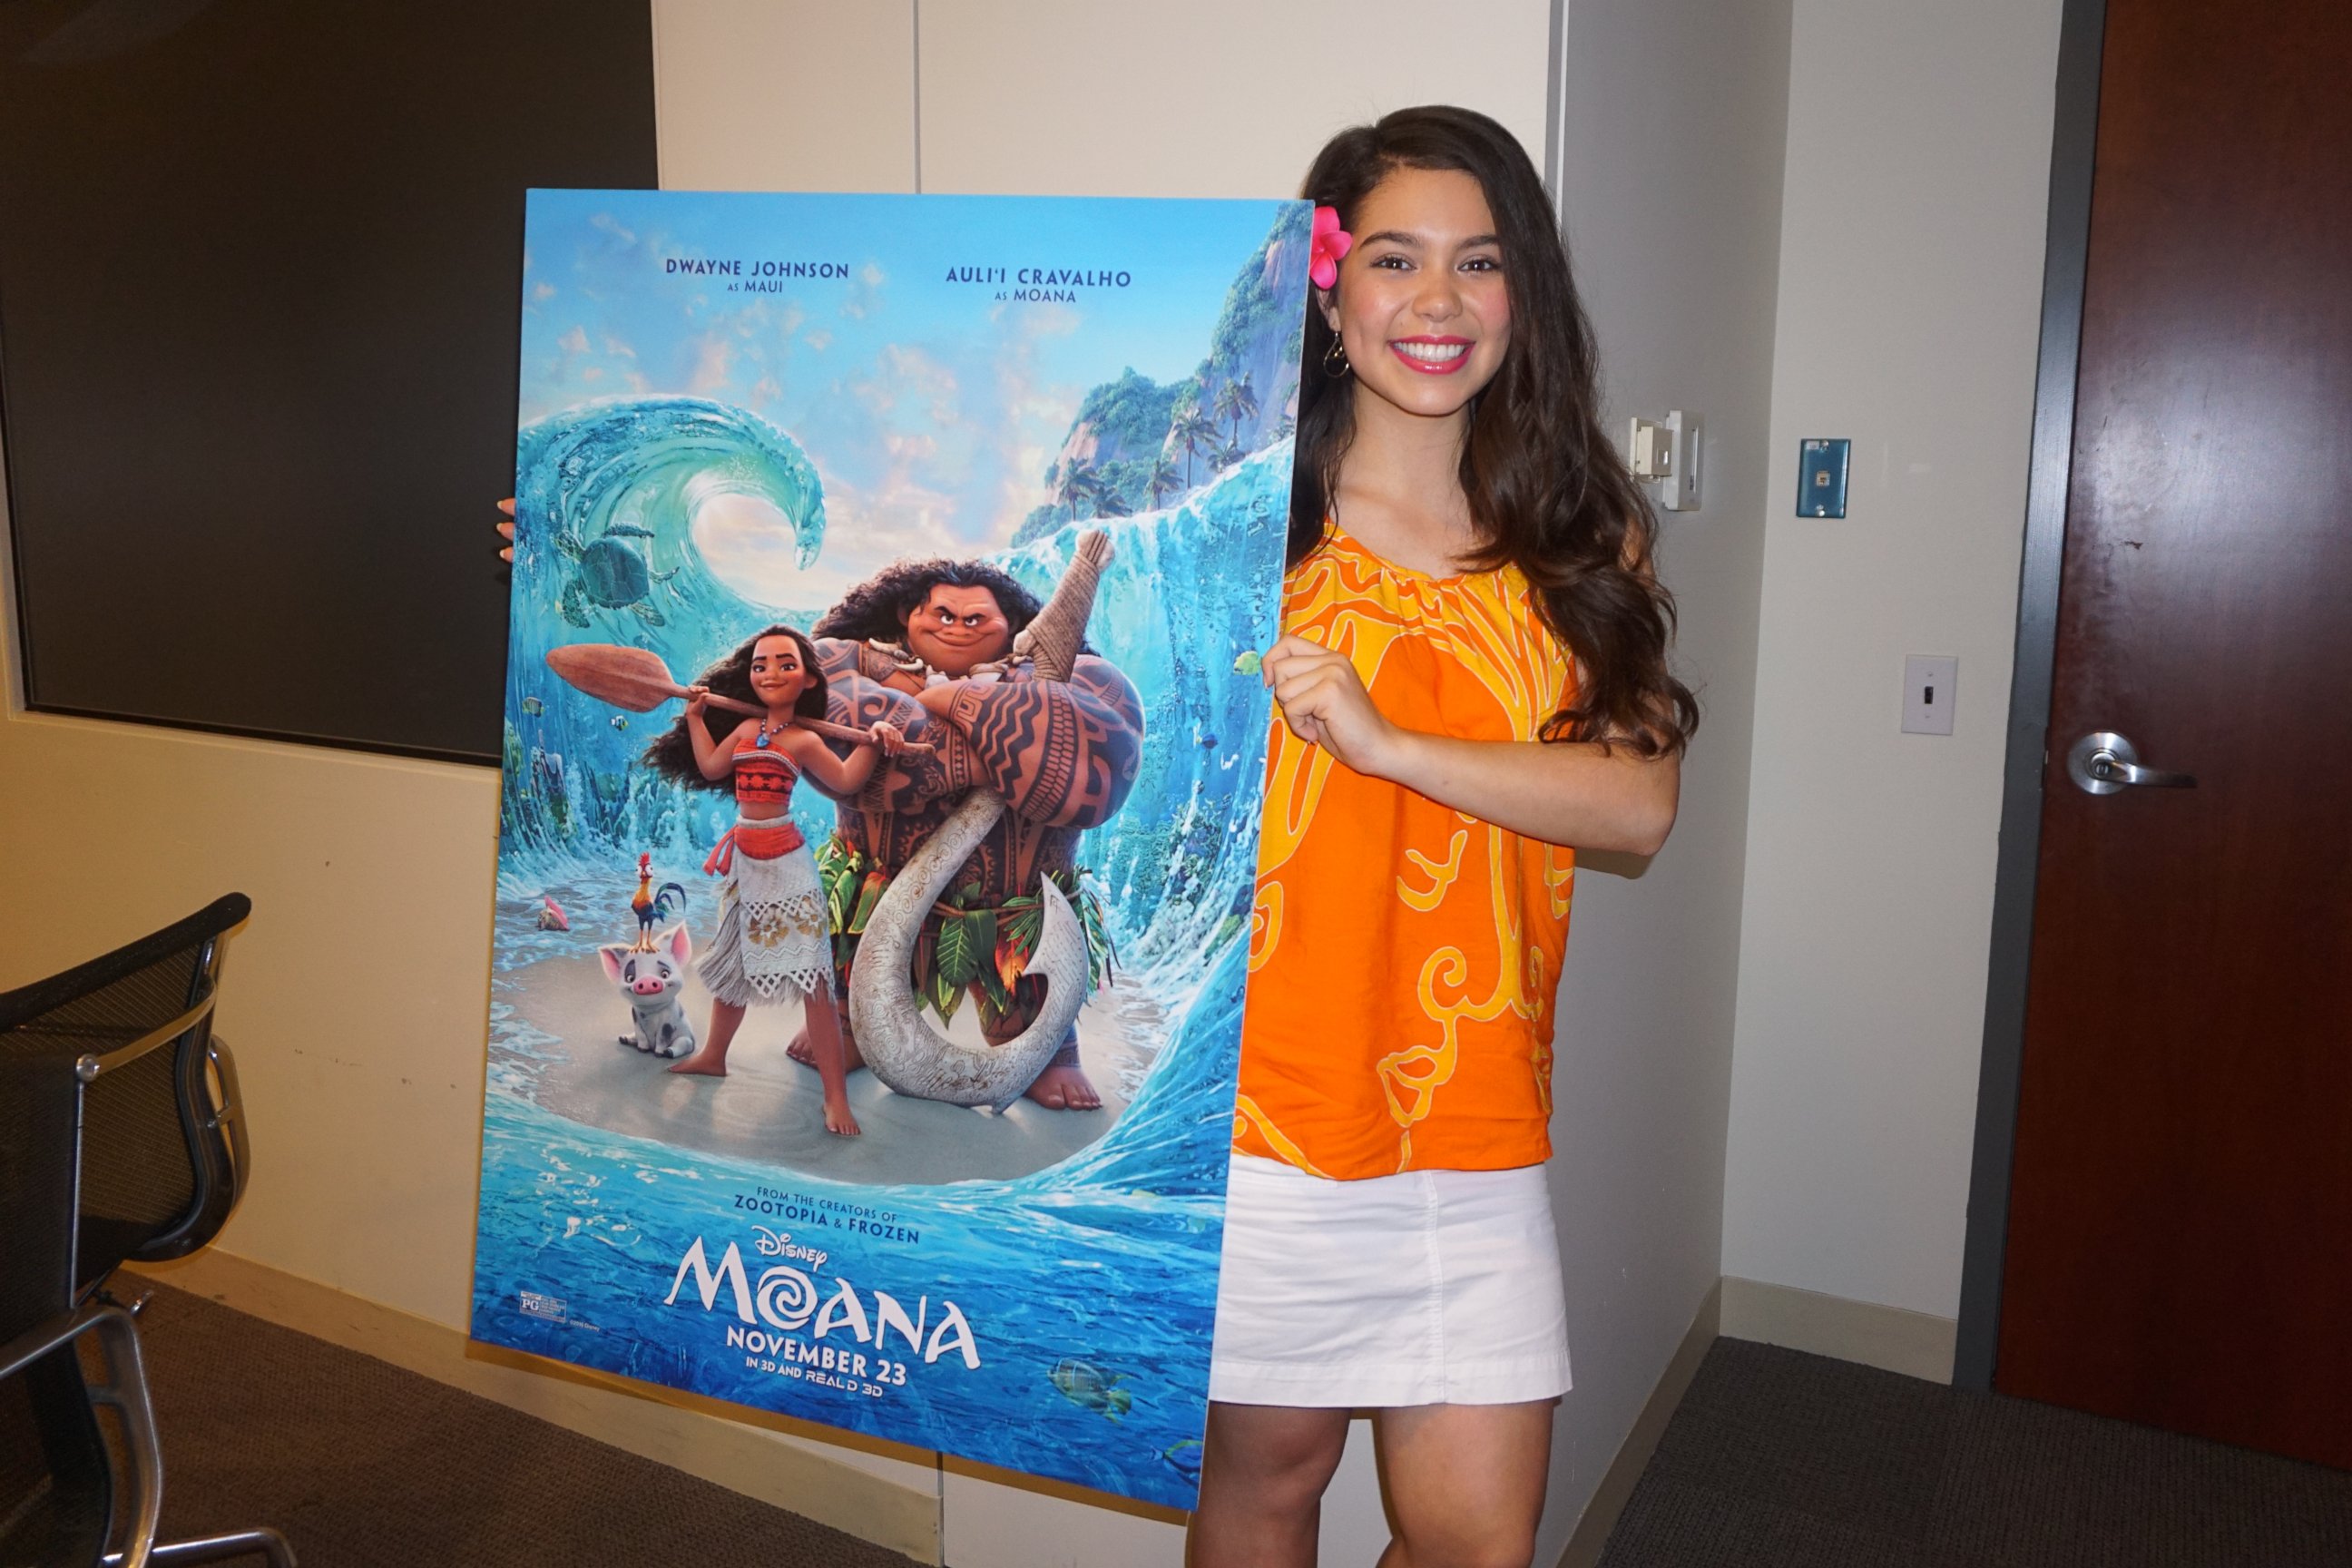 Moana: 10 fun facts about the Disney movie